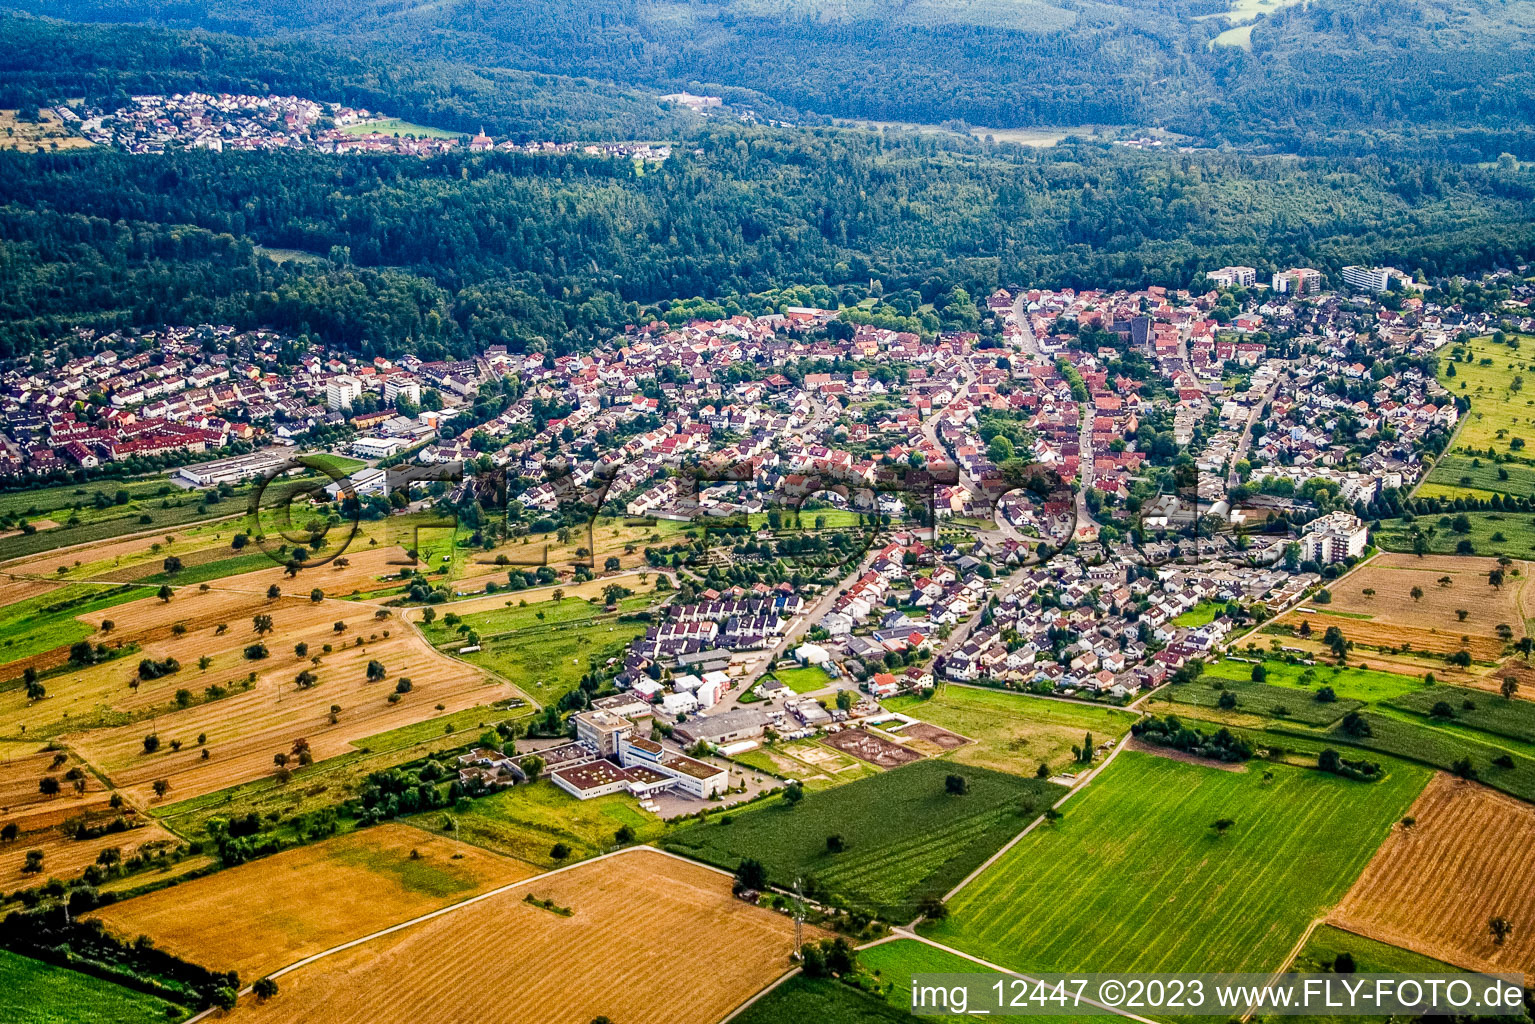 From the east in the district Reichenbach in Waldbronn in the state Baden-Wuerttemberg, Germany